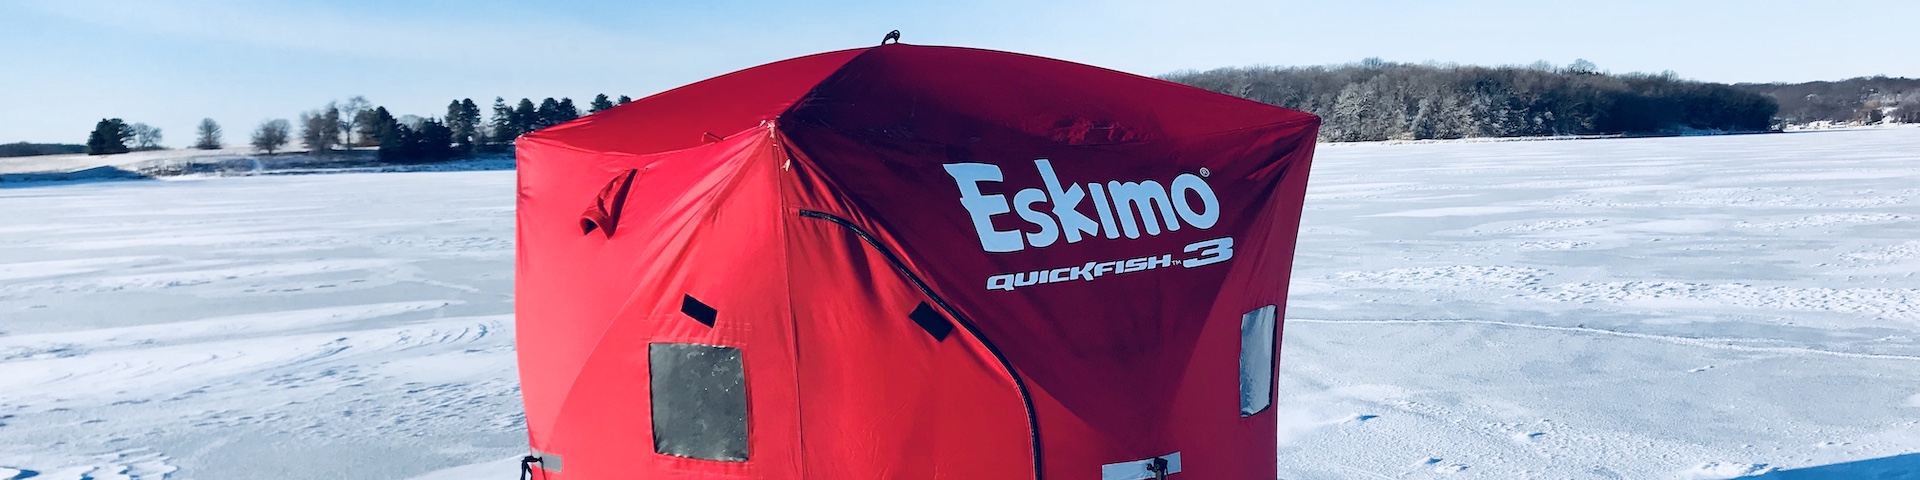 BEST Eskimo 3 Man Pop Up Ice Shelter Tent REVIEW!!! / Quickfish MUST BUY!!  